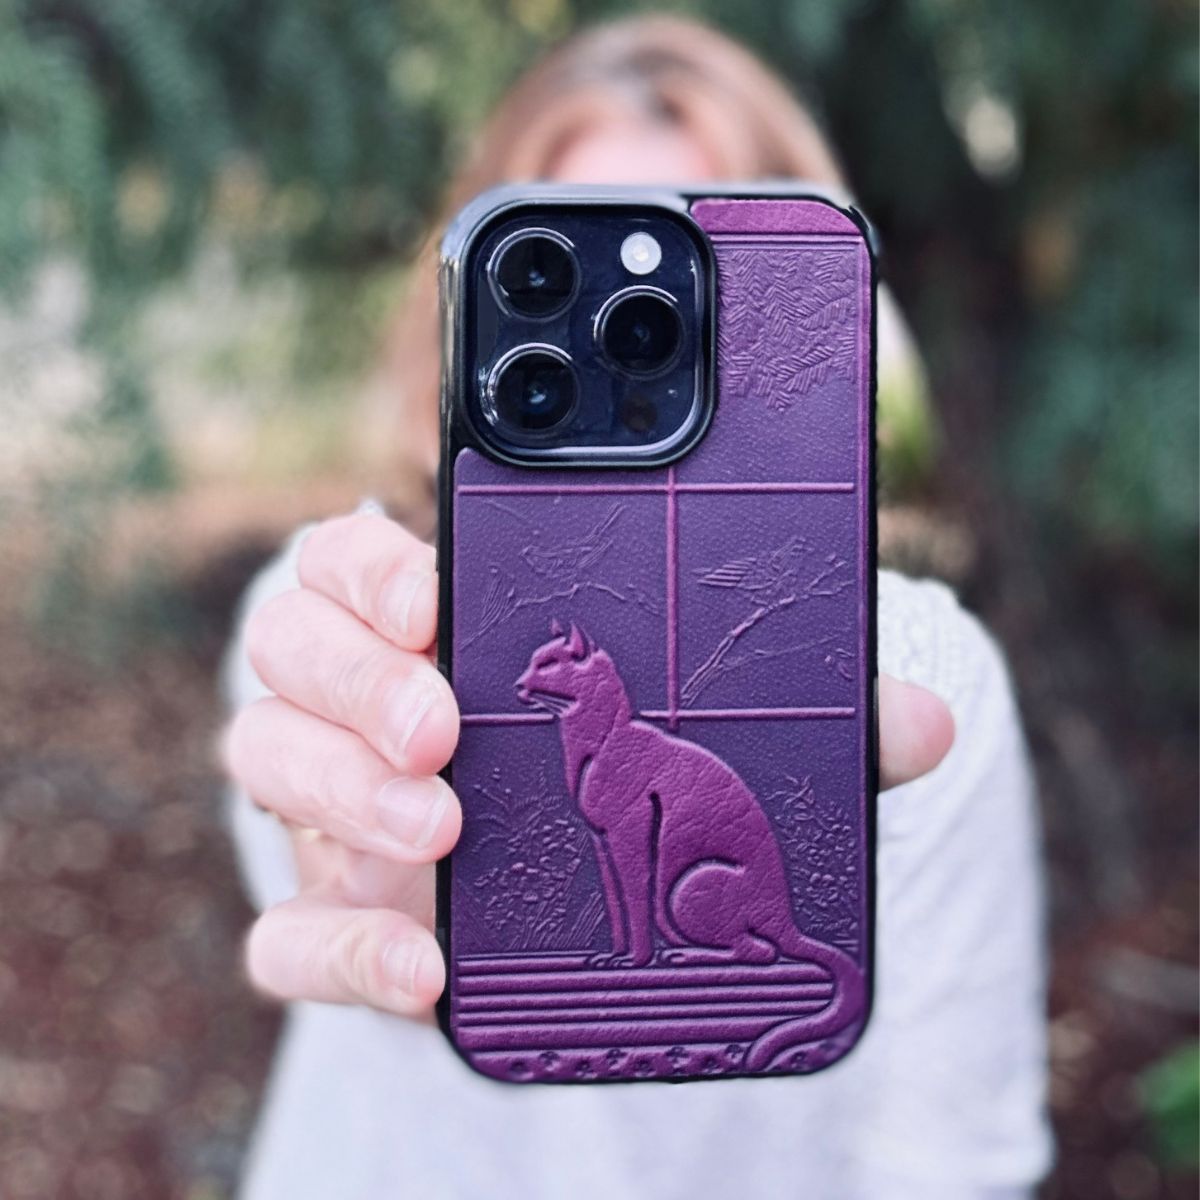 Creative iPhone Cases for Sale